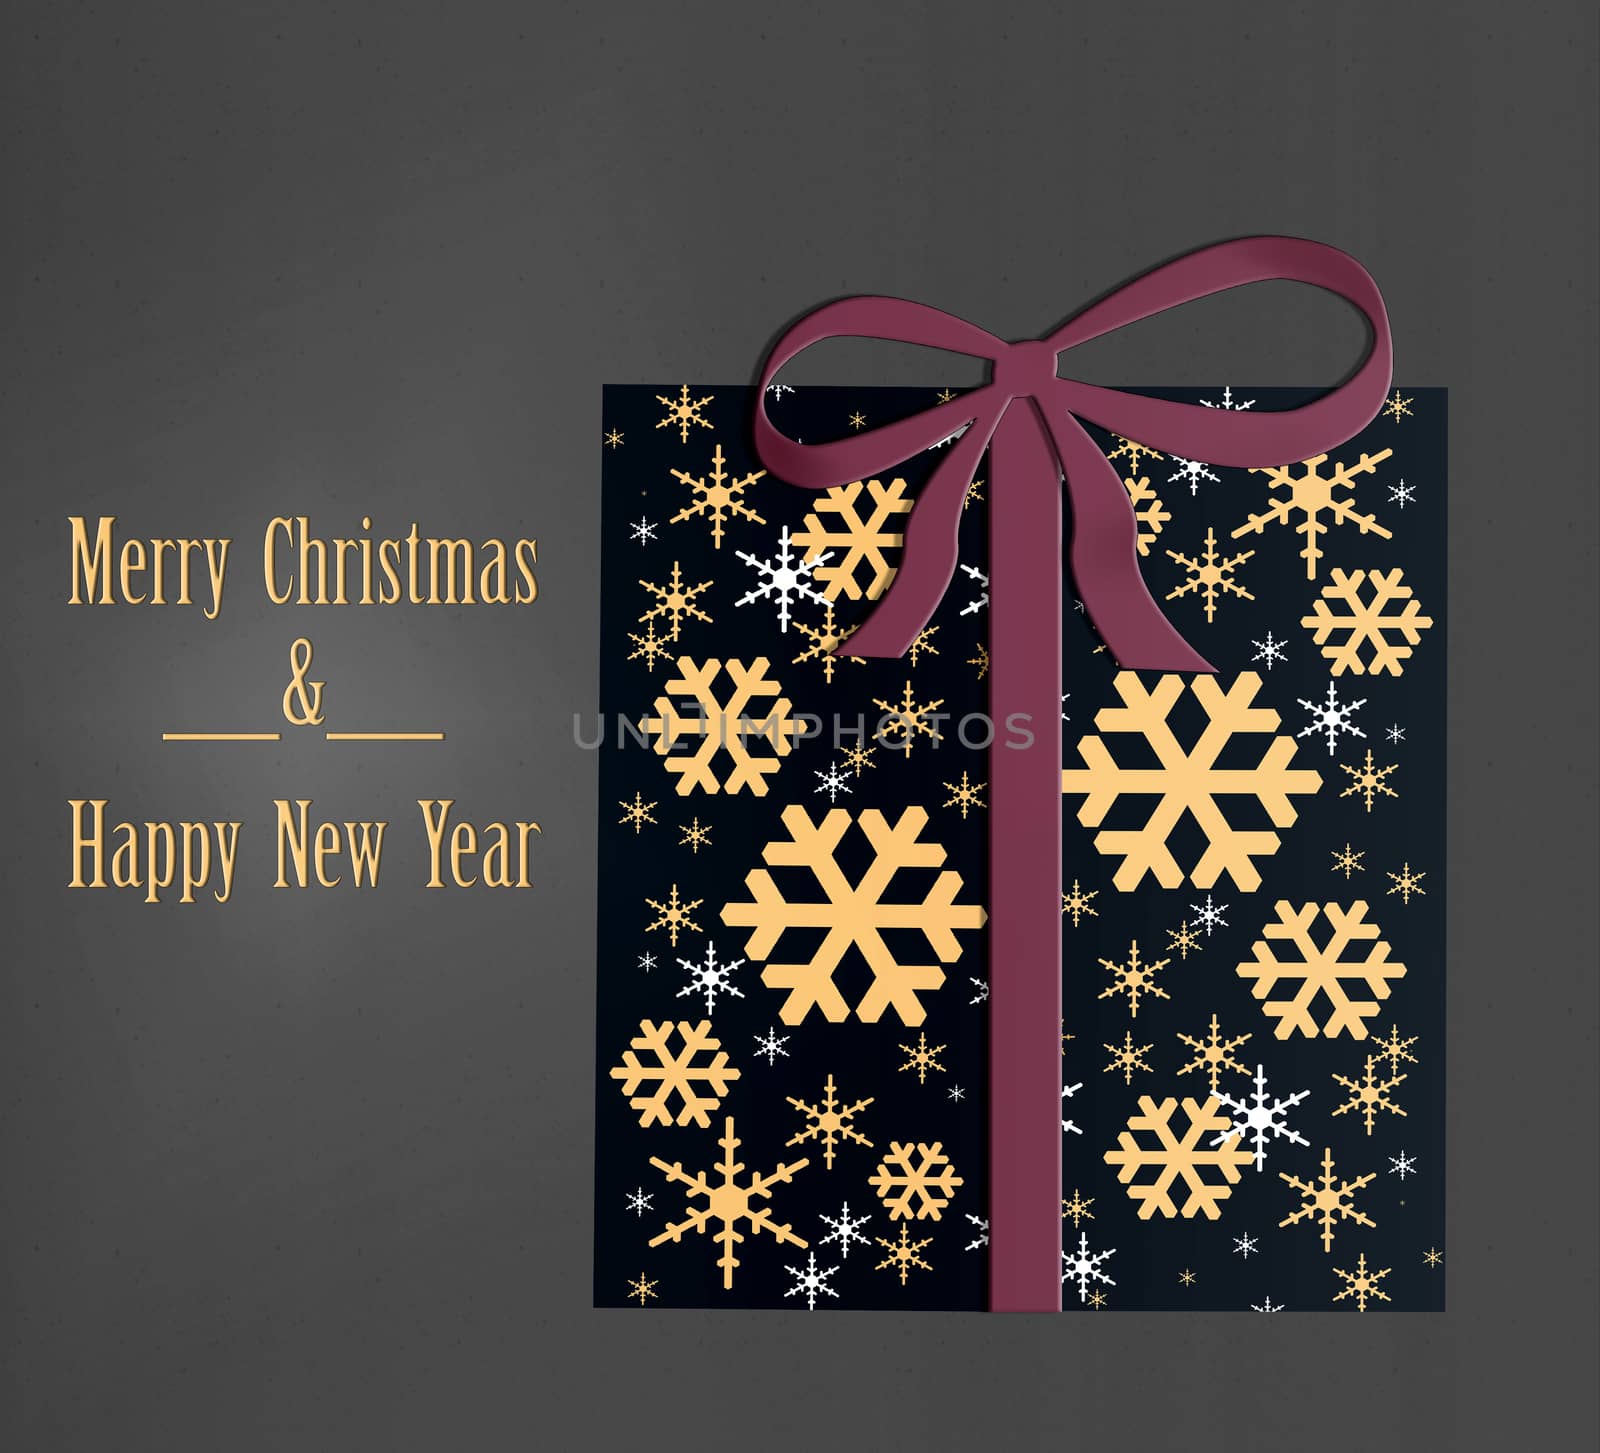 Luxury Christmas greeting card concept with gold words Merry Christmas and Happy New Year. Abstract wrapped gift box with golden snowflakes. Illustration